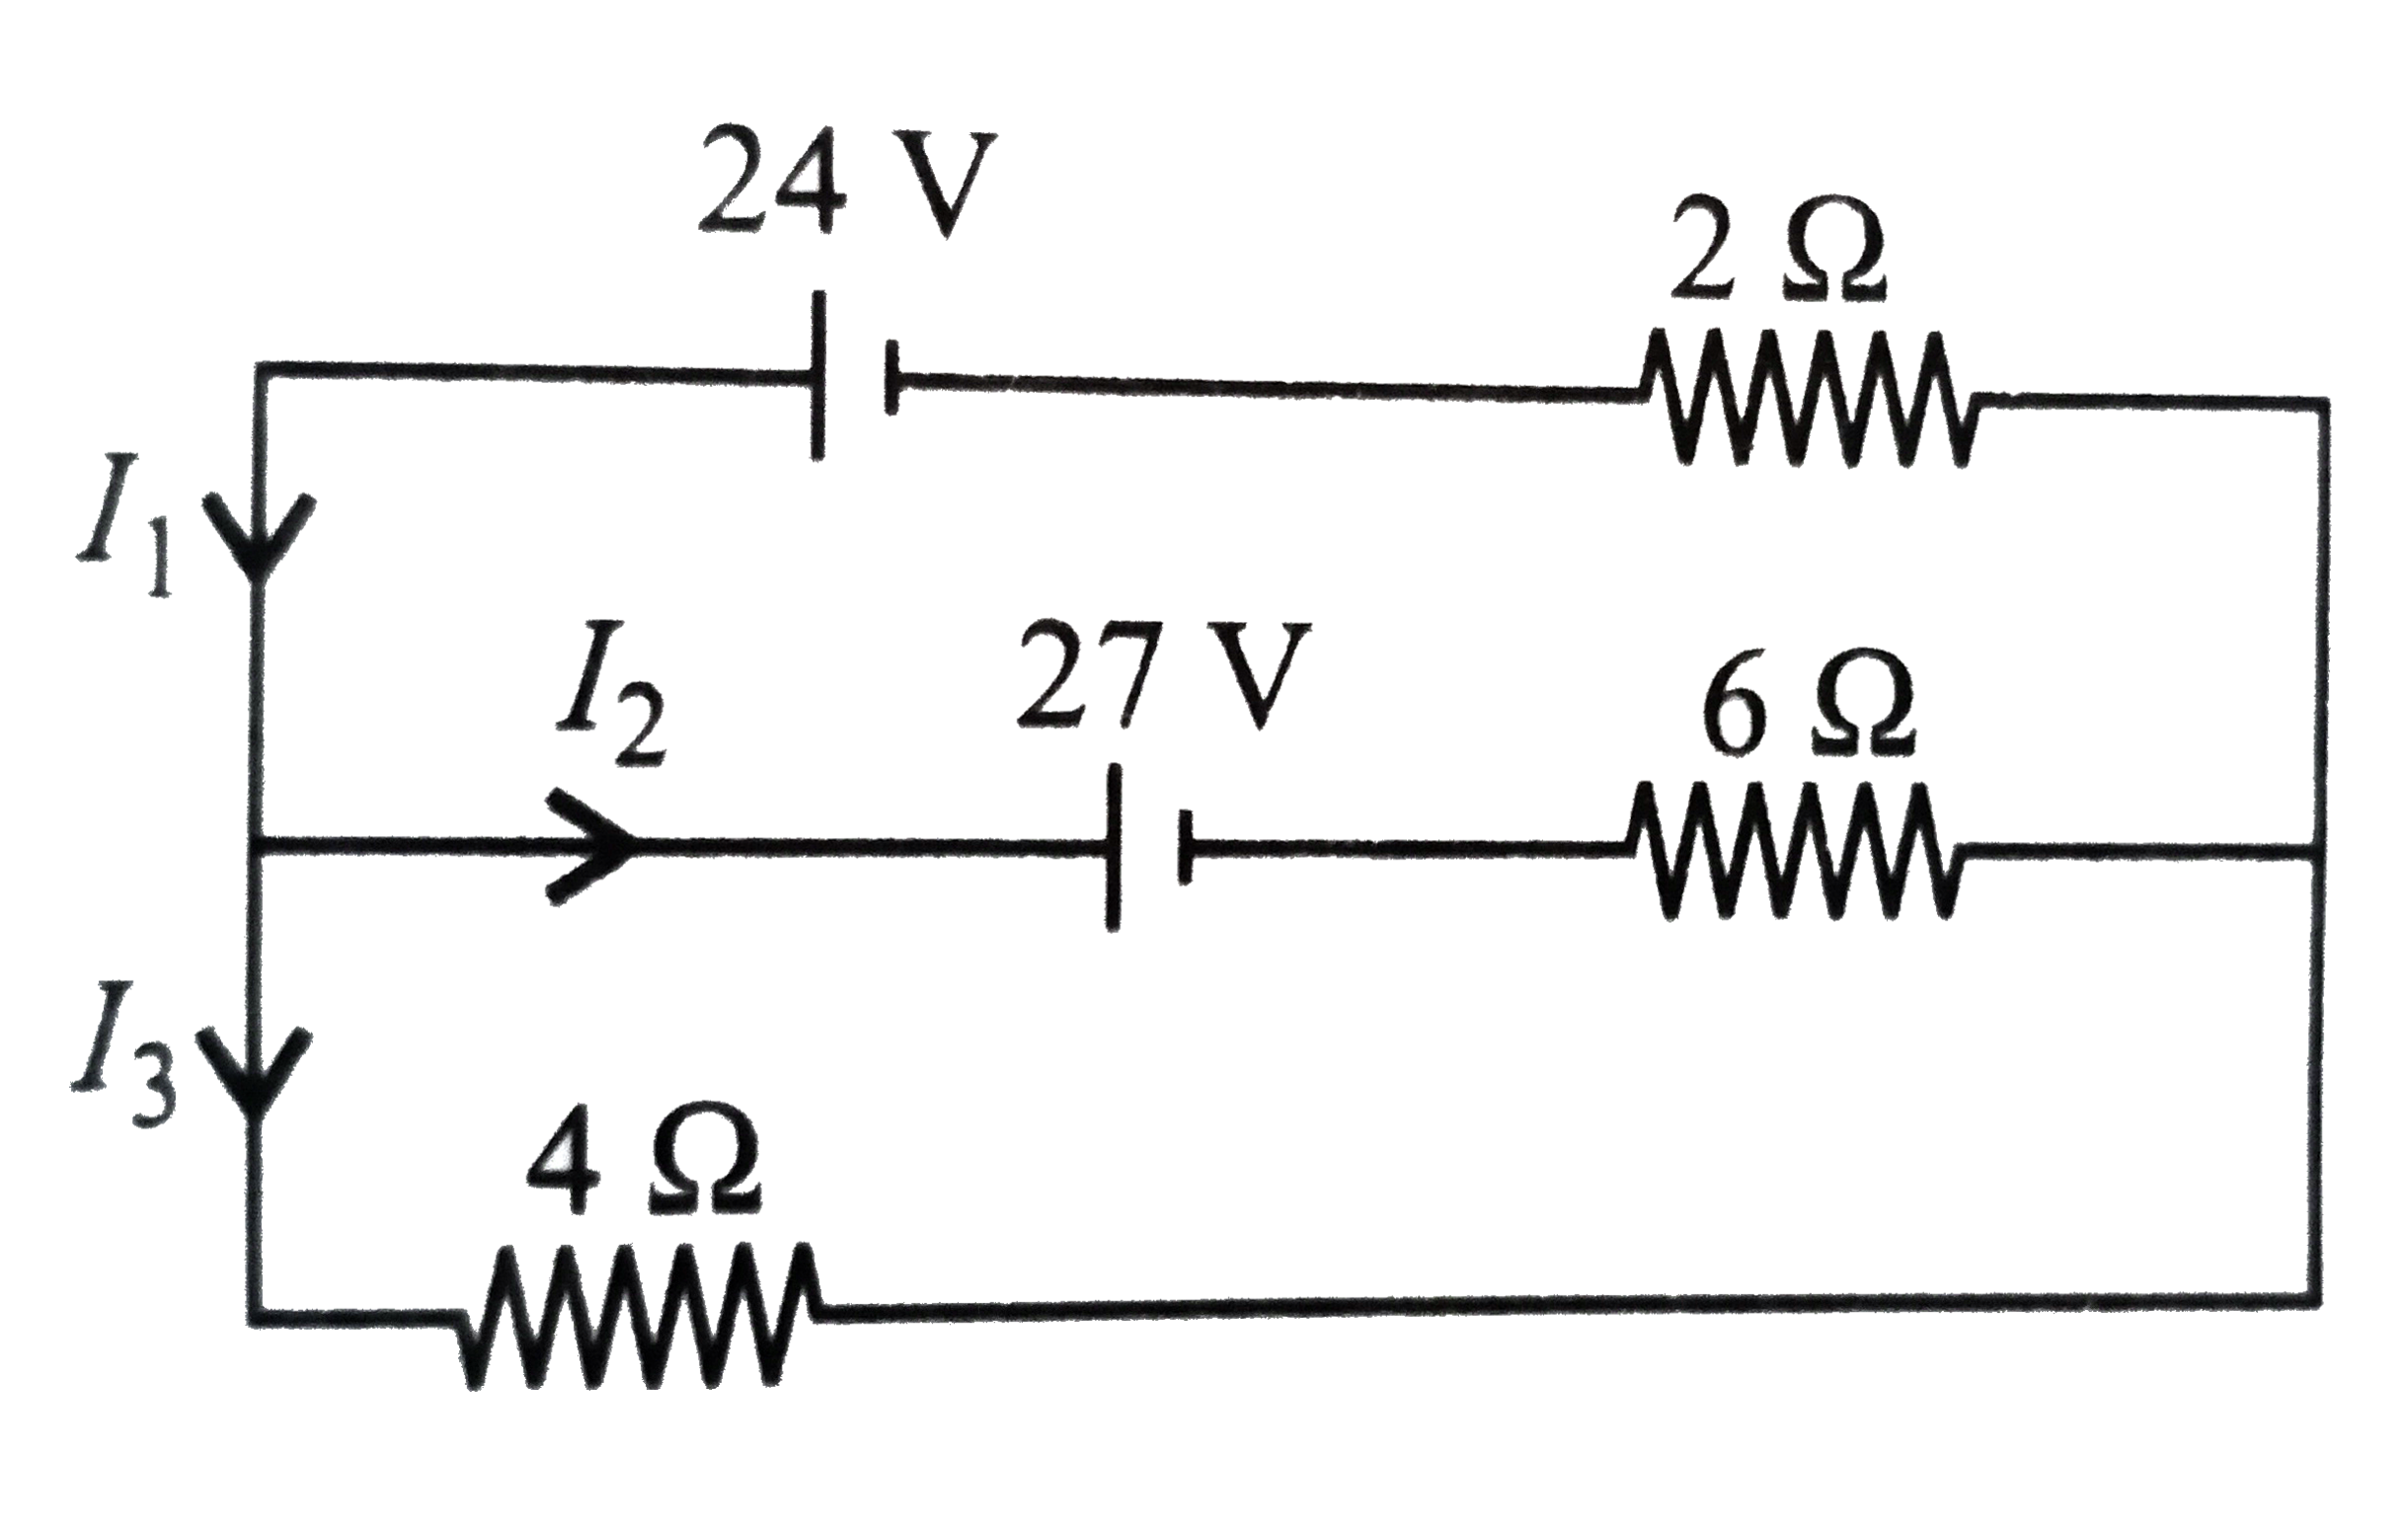 In the circuit shown, the value of currents I(1), I(2) and I(3) are